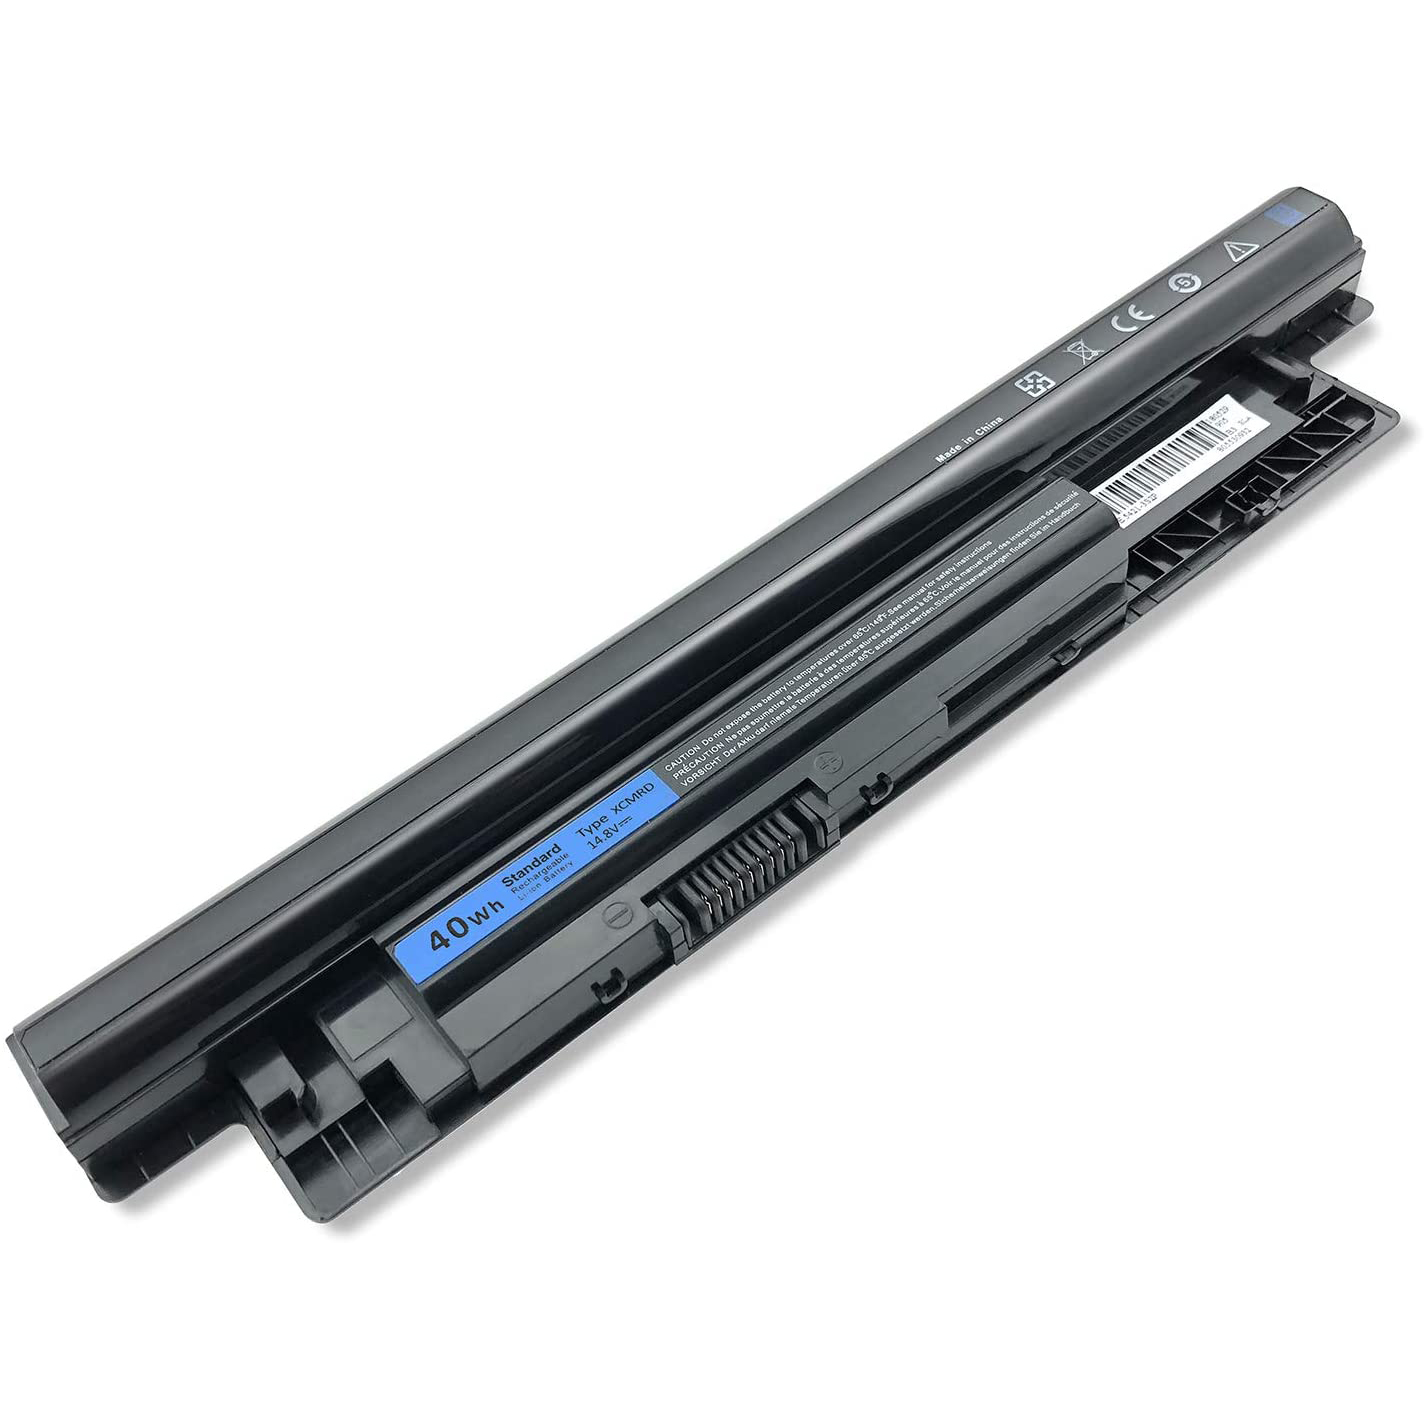 BATTERY FOR NOTEBOOK DELL INSPIRON XCMRD 15 3000 15-3521 15-3537 15-3541 15-3542 15-5521 15-N3521 15-N5521 15-1528 M&M COPY ,Laptop Battery